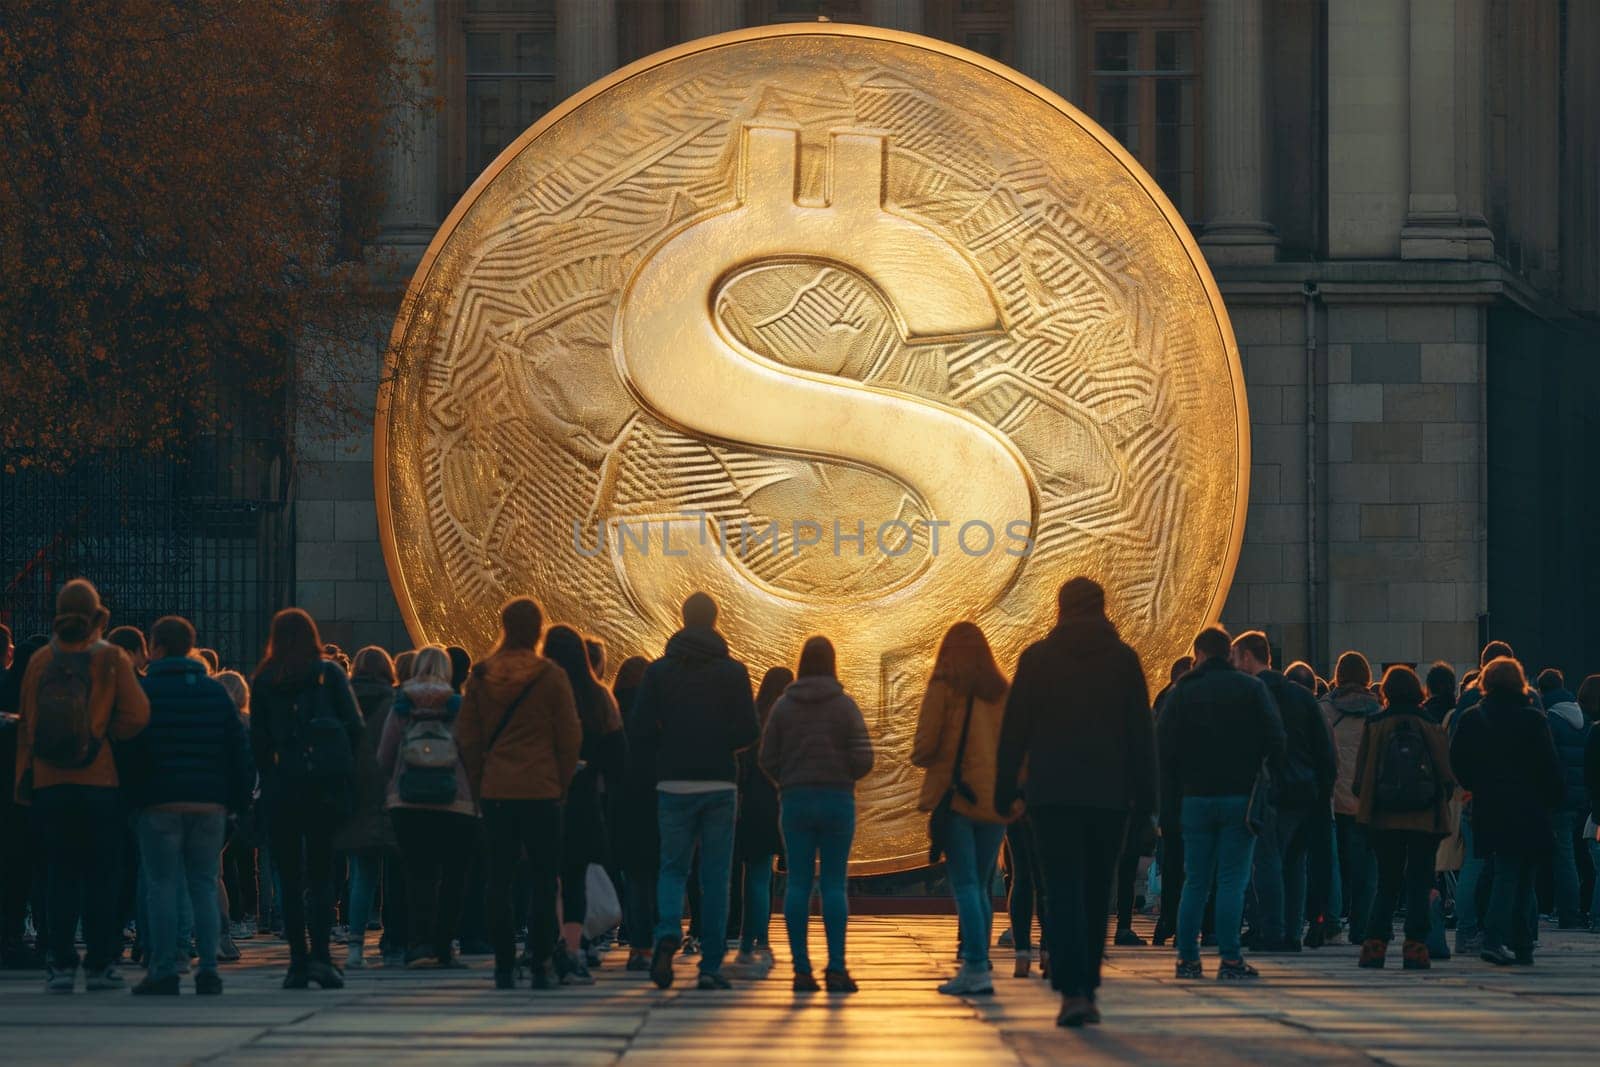 A large golden dollar sign stands prominently in front of a diverse crowd of people, symbolizing wealth and financial success.